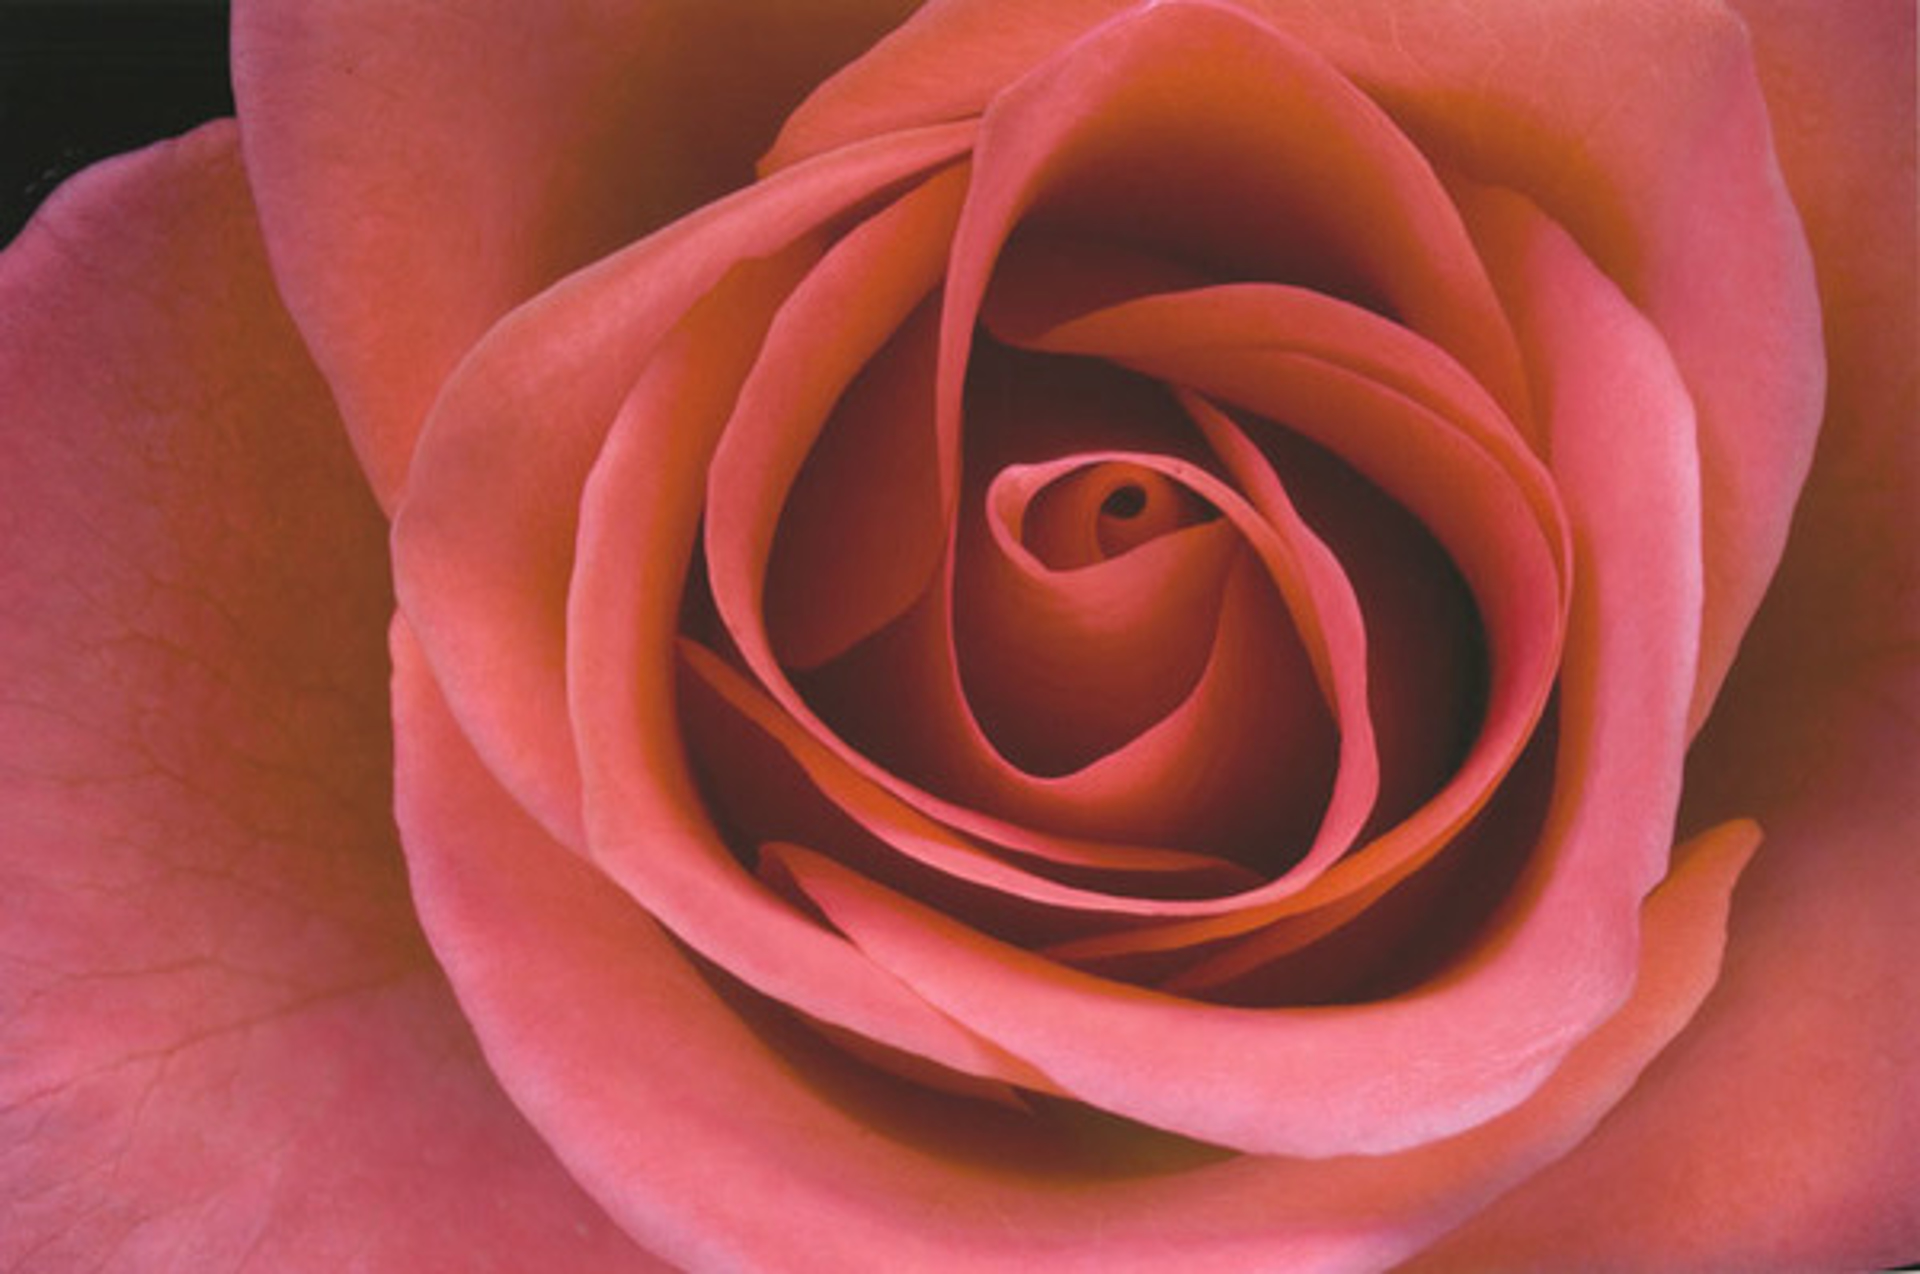 Peach Rose #2 by Murray Weiss